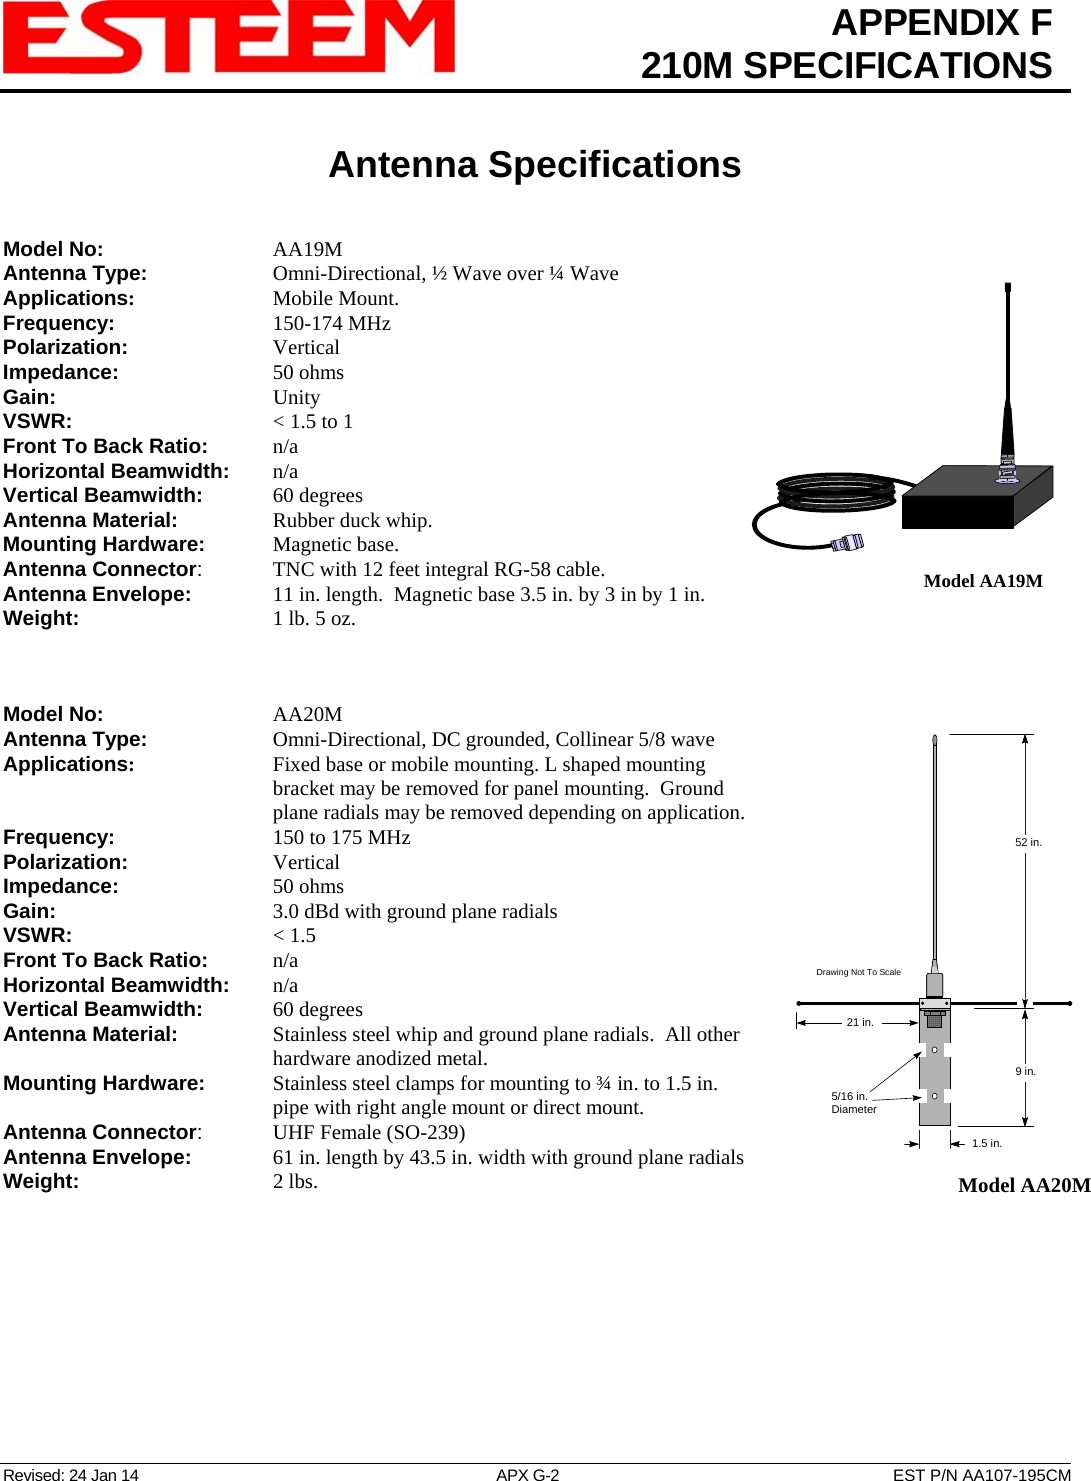  APPENDIX F  210M SPECIFICATIONS   Antenna Specifications   Revised: 24 Jan 14  APX G-2  EST P/N AA107-195CM Model No:    AA19M Antenna Type:   Omni-Directional, ½ Wave over ¼ Wave Applications:    Mobile Mount. Frequency:    150-174 MHz  Polarization:    Vertical Impedance:    50 ohms Gain:     Unity VSWR:      &lt; 1.5 to 1  Front To Back Ratio:   n/a Horizontal Beamwidth:  n/a Vertical Beamwidth:      60 degrees Antenna Material:     Rubber duck whip.  Mounting Hardware:      Magnetic base.  Antenna Connector:    TNC with 12 feet integral RG-58 cable. Antenna Envelope:   11 in. length.  Magnetic base 3.5 in. by 3 in by 1 in.  Model AA19MWeight:           1 lb. 5 oz.     Model No:    AA20M Antenna Type:   Omni-Directional, DC grounded, Collinear 5/8 wave  Applications:       Fixed base or mobile mounting. L shaped mounting bracket may be removed for panel mounting.  Ground plane radials may be removed depending on application. Frequency:    150 to 175 MHz  Polarization:    Vertical Impedance:    50 ohms Gain:          3.0 dBd with ground plane radials VSWR:      &lt; 1.5  Front To Back Ratio:   n/a Horizontal Beamwidth:  n/a Vertical Beamwidth:      60 degrees Antenna Material:     Stainless steel whip and ground plane radials.  All other hardware anodized metal.  Mounting Hardware:      Stainless steel clamps for mounting to ¾ in. to 1.5 in. pipe with right angle mount or direct mount.  Antenna Connector:    UHF Female (SO-239) Antenna Envelope:   61 in. length by 43.5 in. width with ground plane radials  1.5 in.9 in.Drawing Not To Scale5/16 in.Diameter52 in.21 in.Model AA20M  Weight:       2 lbs. 